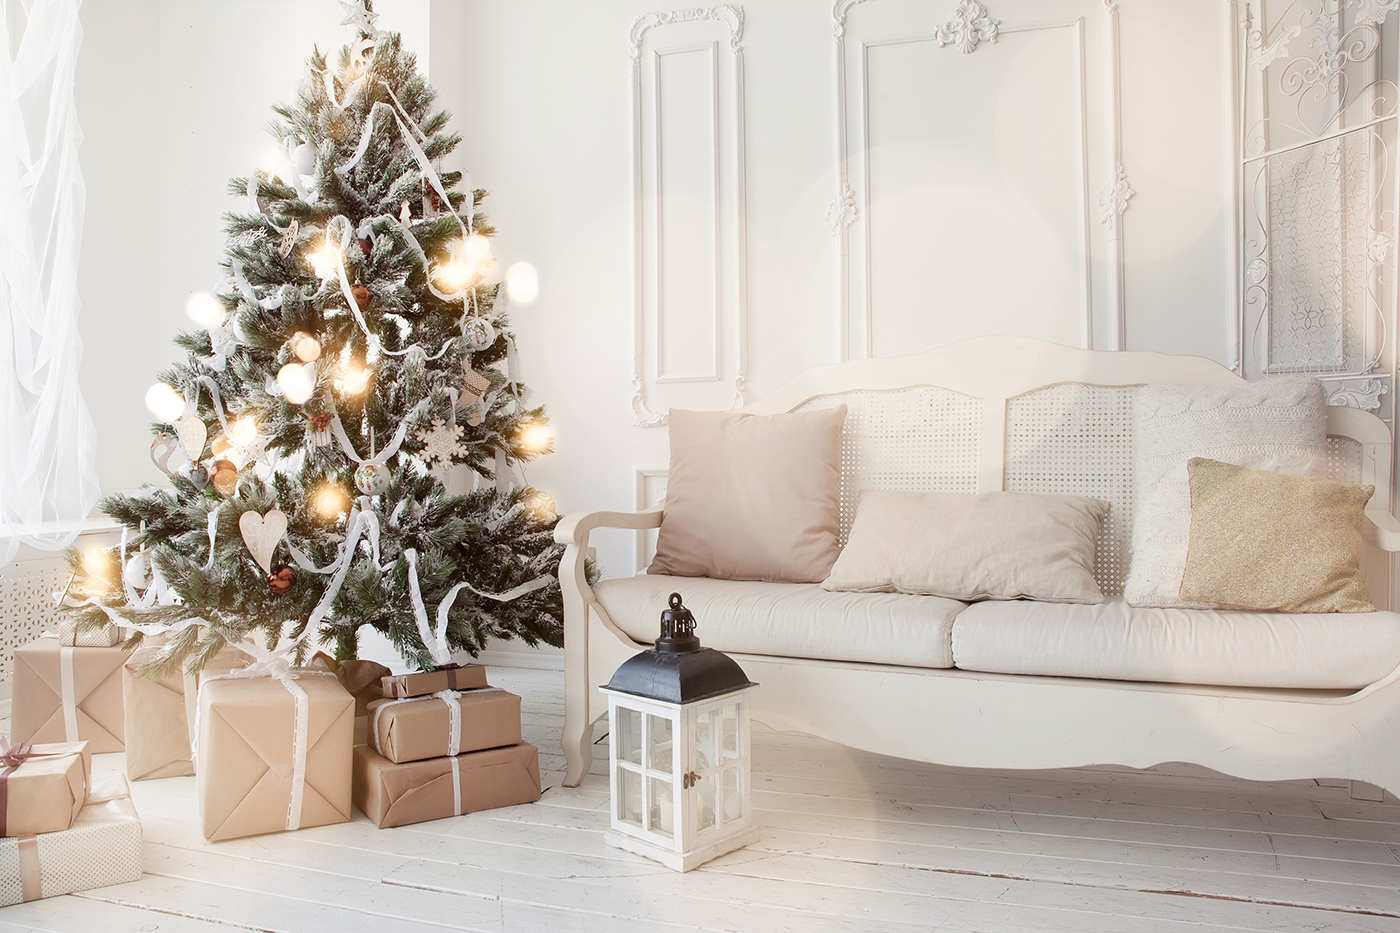 How to Decorate Using Winter Whites to Brighten Up Your Home - bhgrelife.com